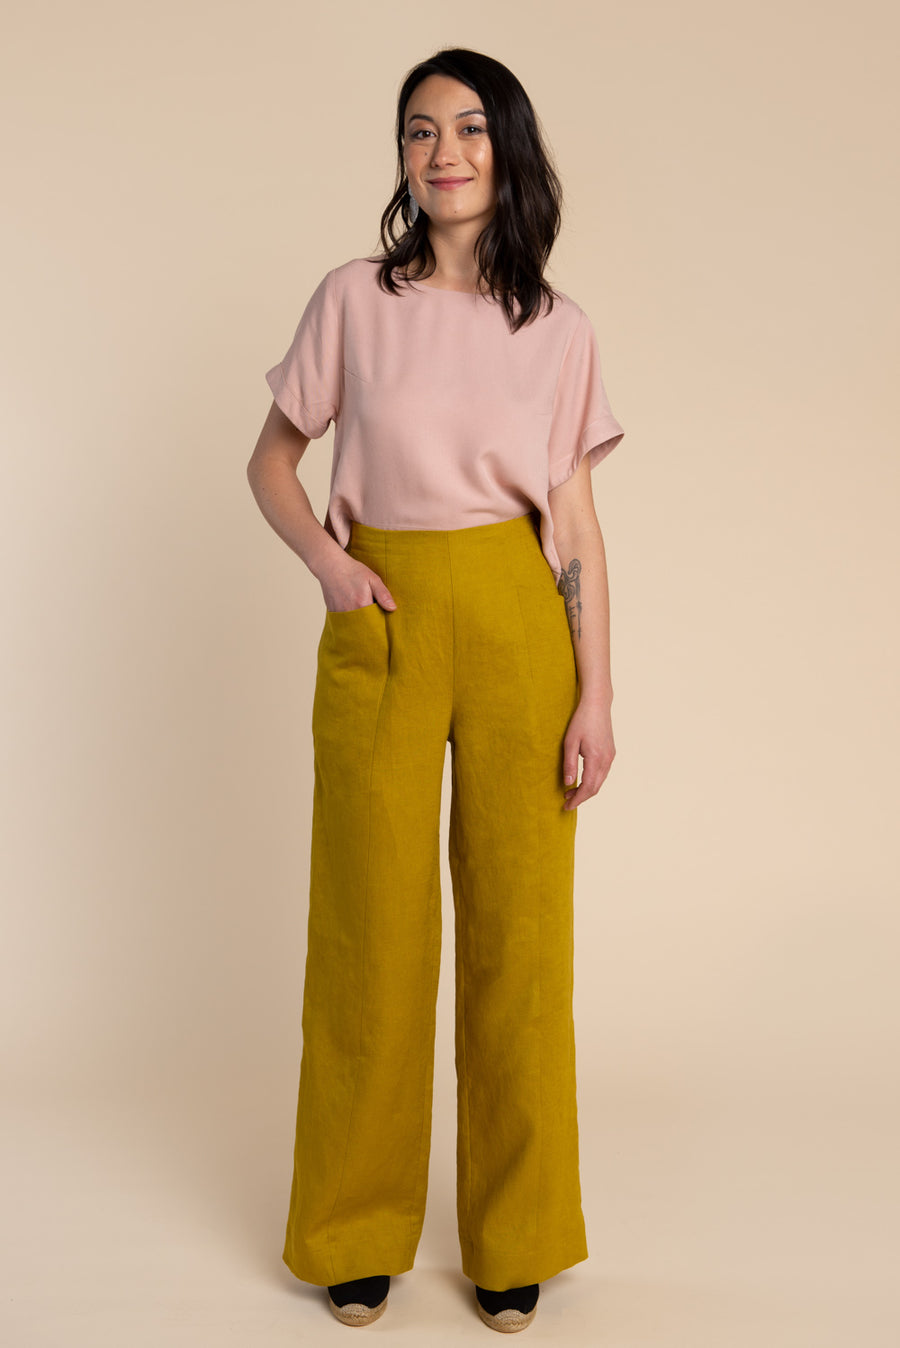 This Palazzo Pants Pattern Is About To Be Your Favorite Pattern